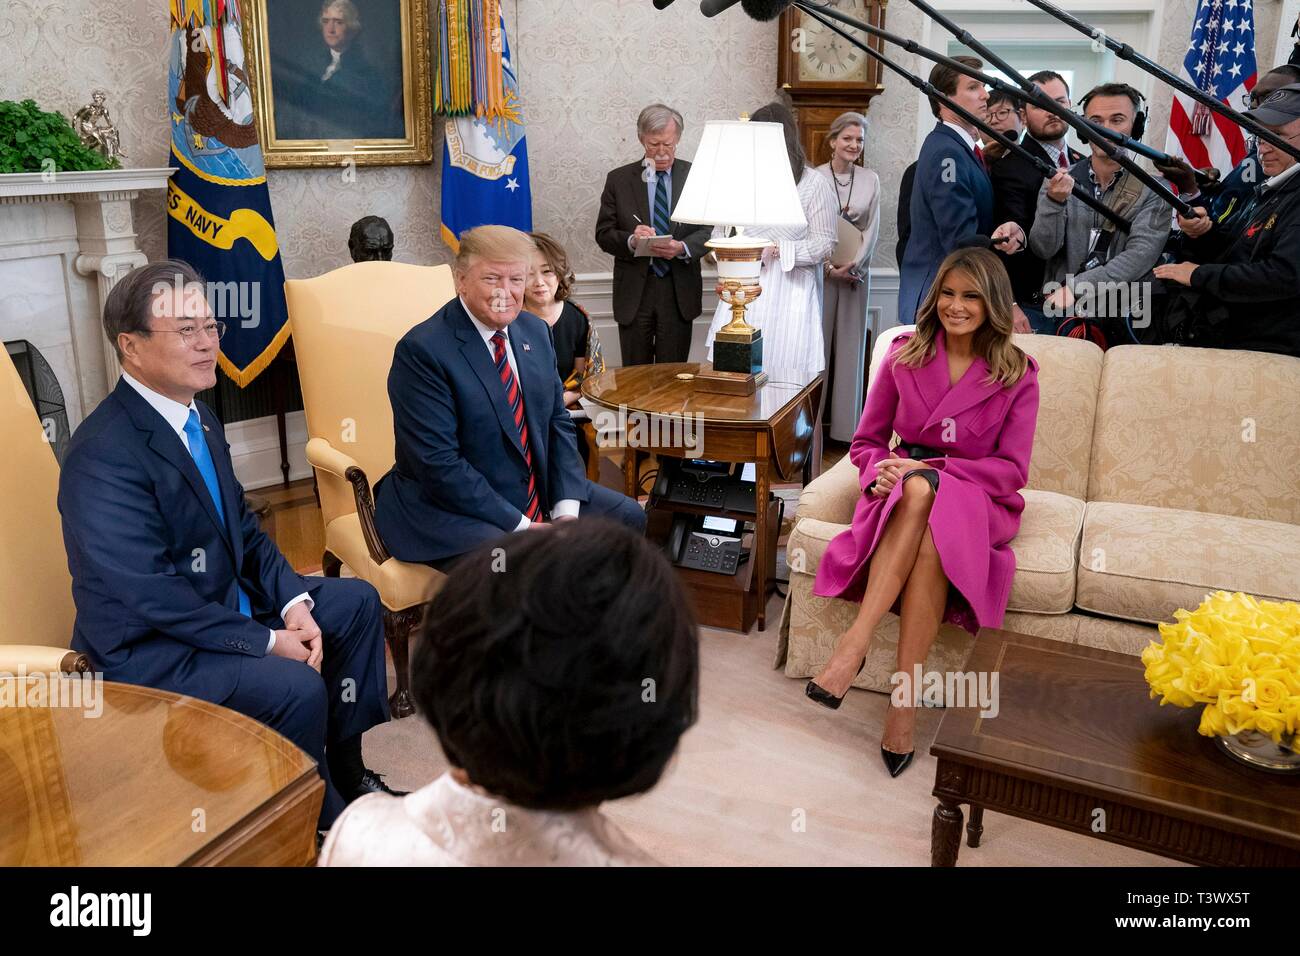 Washington, United States Of America. 11th Apr, 2019. U.S. President Donald Trump, South Korean President Moon Jae-in, Mrs. Kim Jung-sook and First Lady Melania Trump during a meeting in the Oval Office of the White House April 11, 2019 in Washington, DC Credit: Planetpix/Alamy Live News Stock Photo